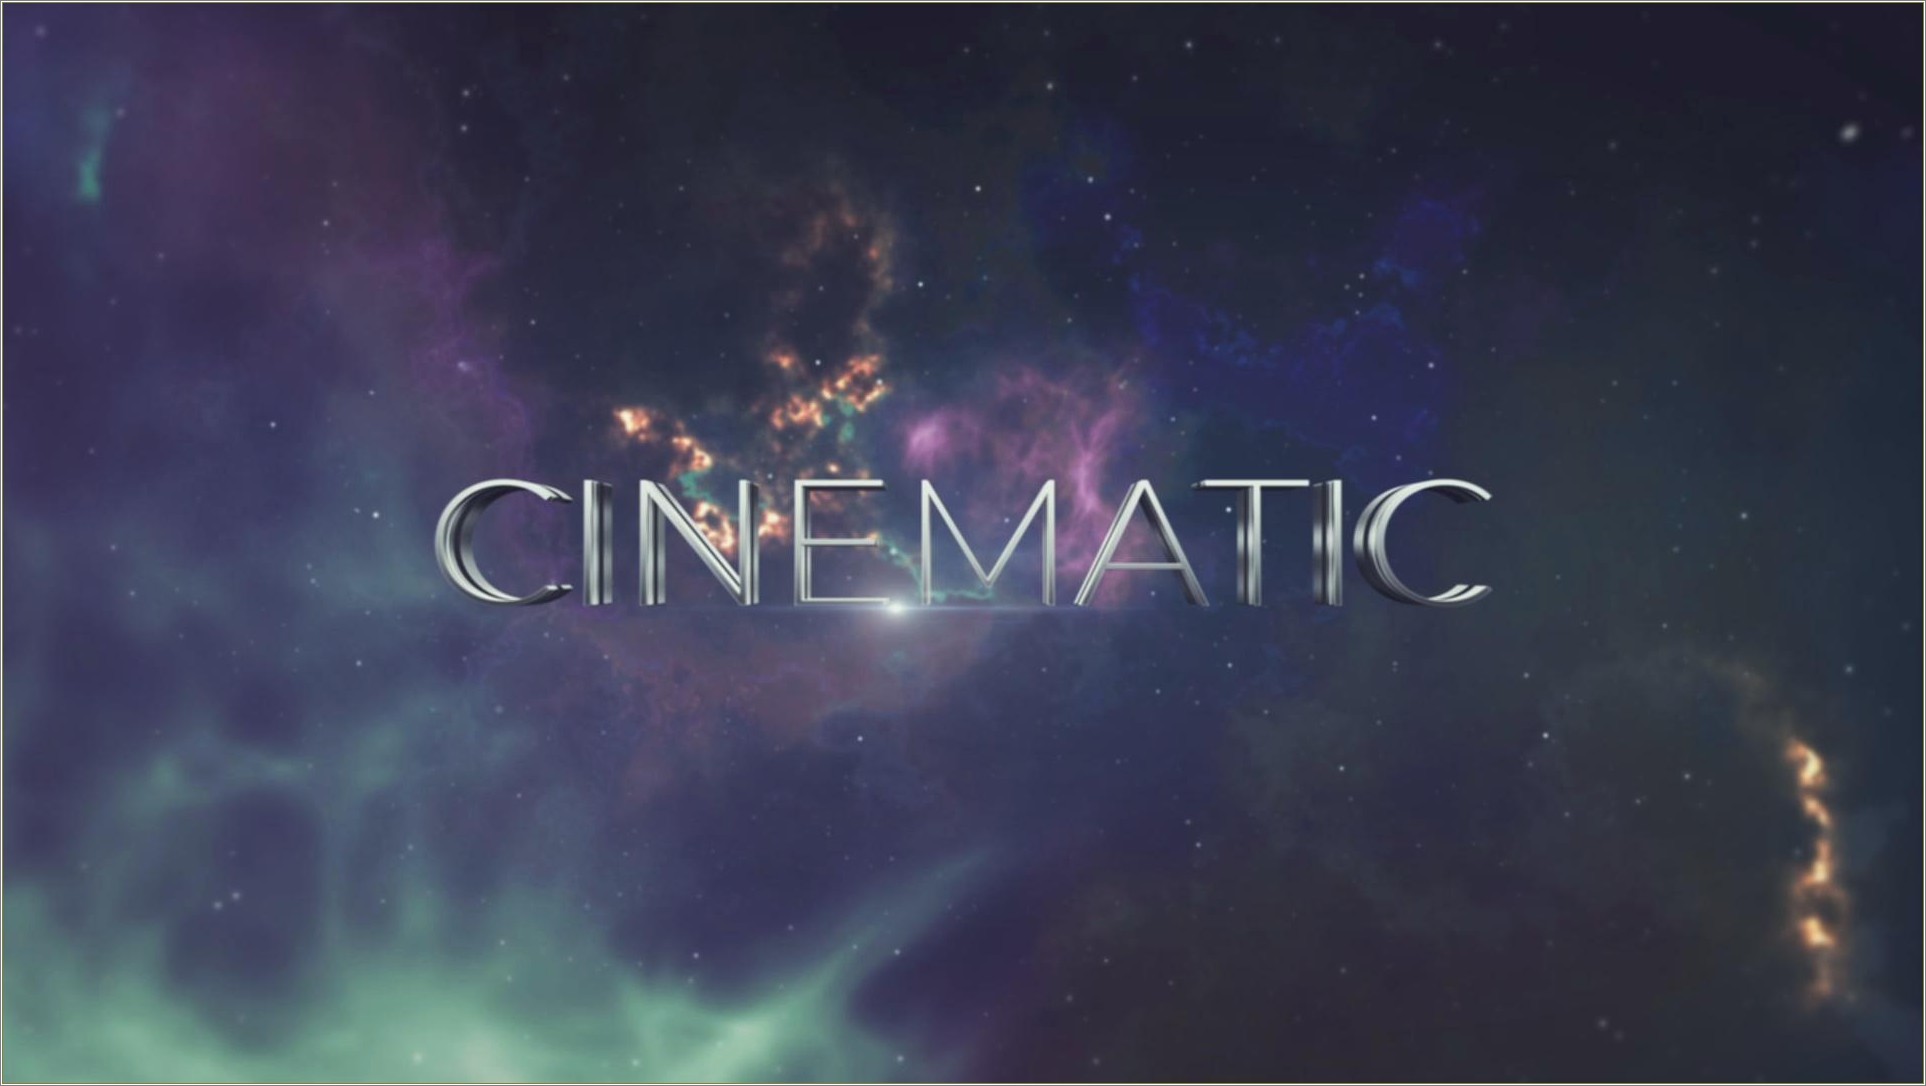 Cinematic Trailer Titles Free After Effects Template